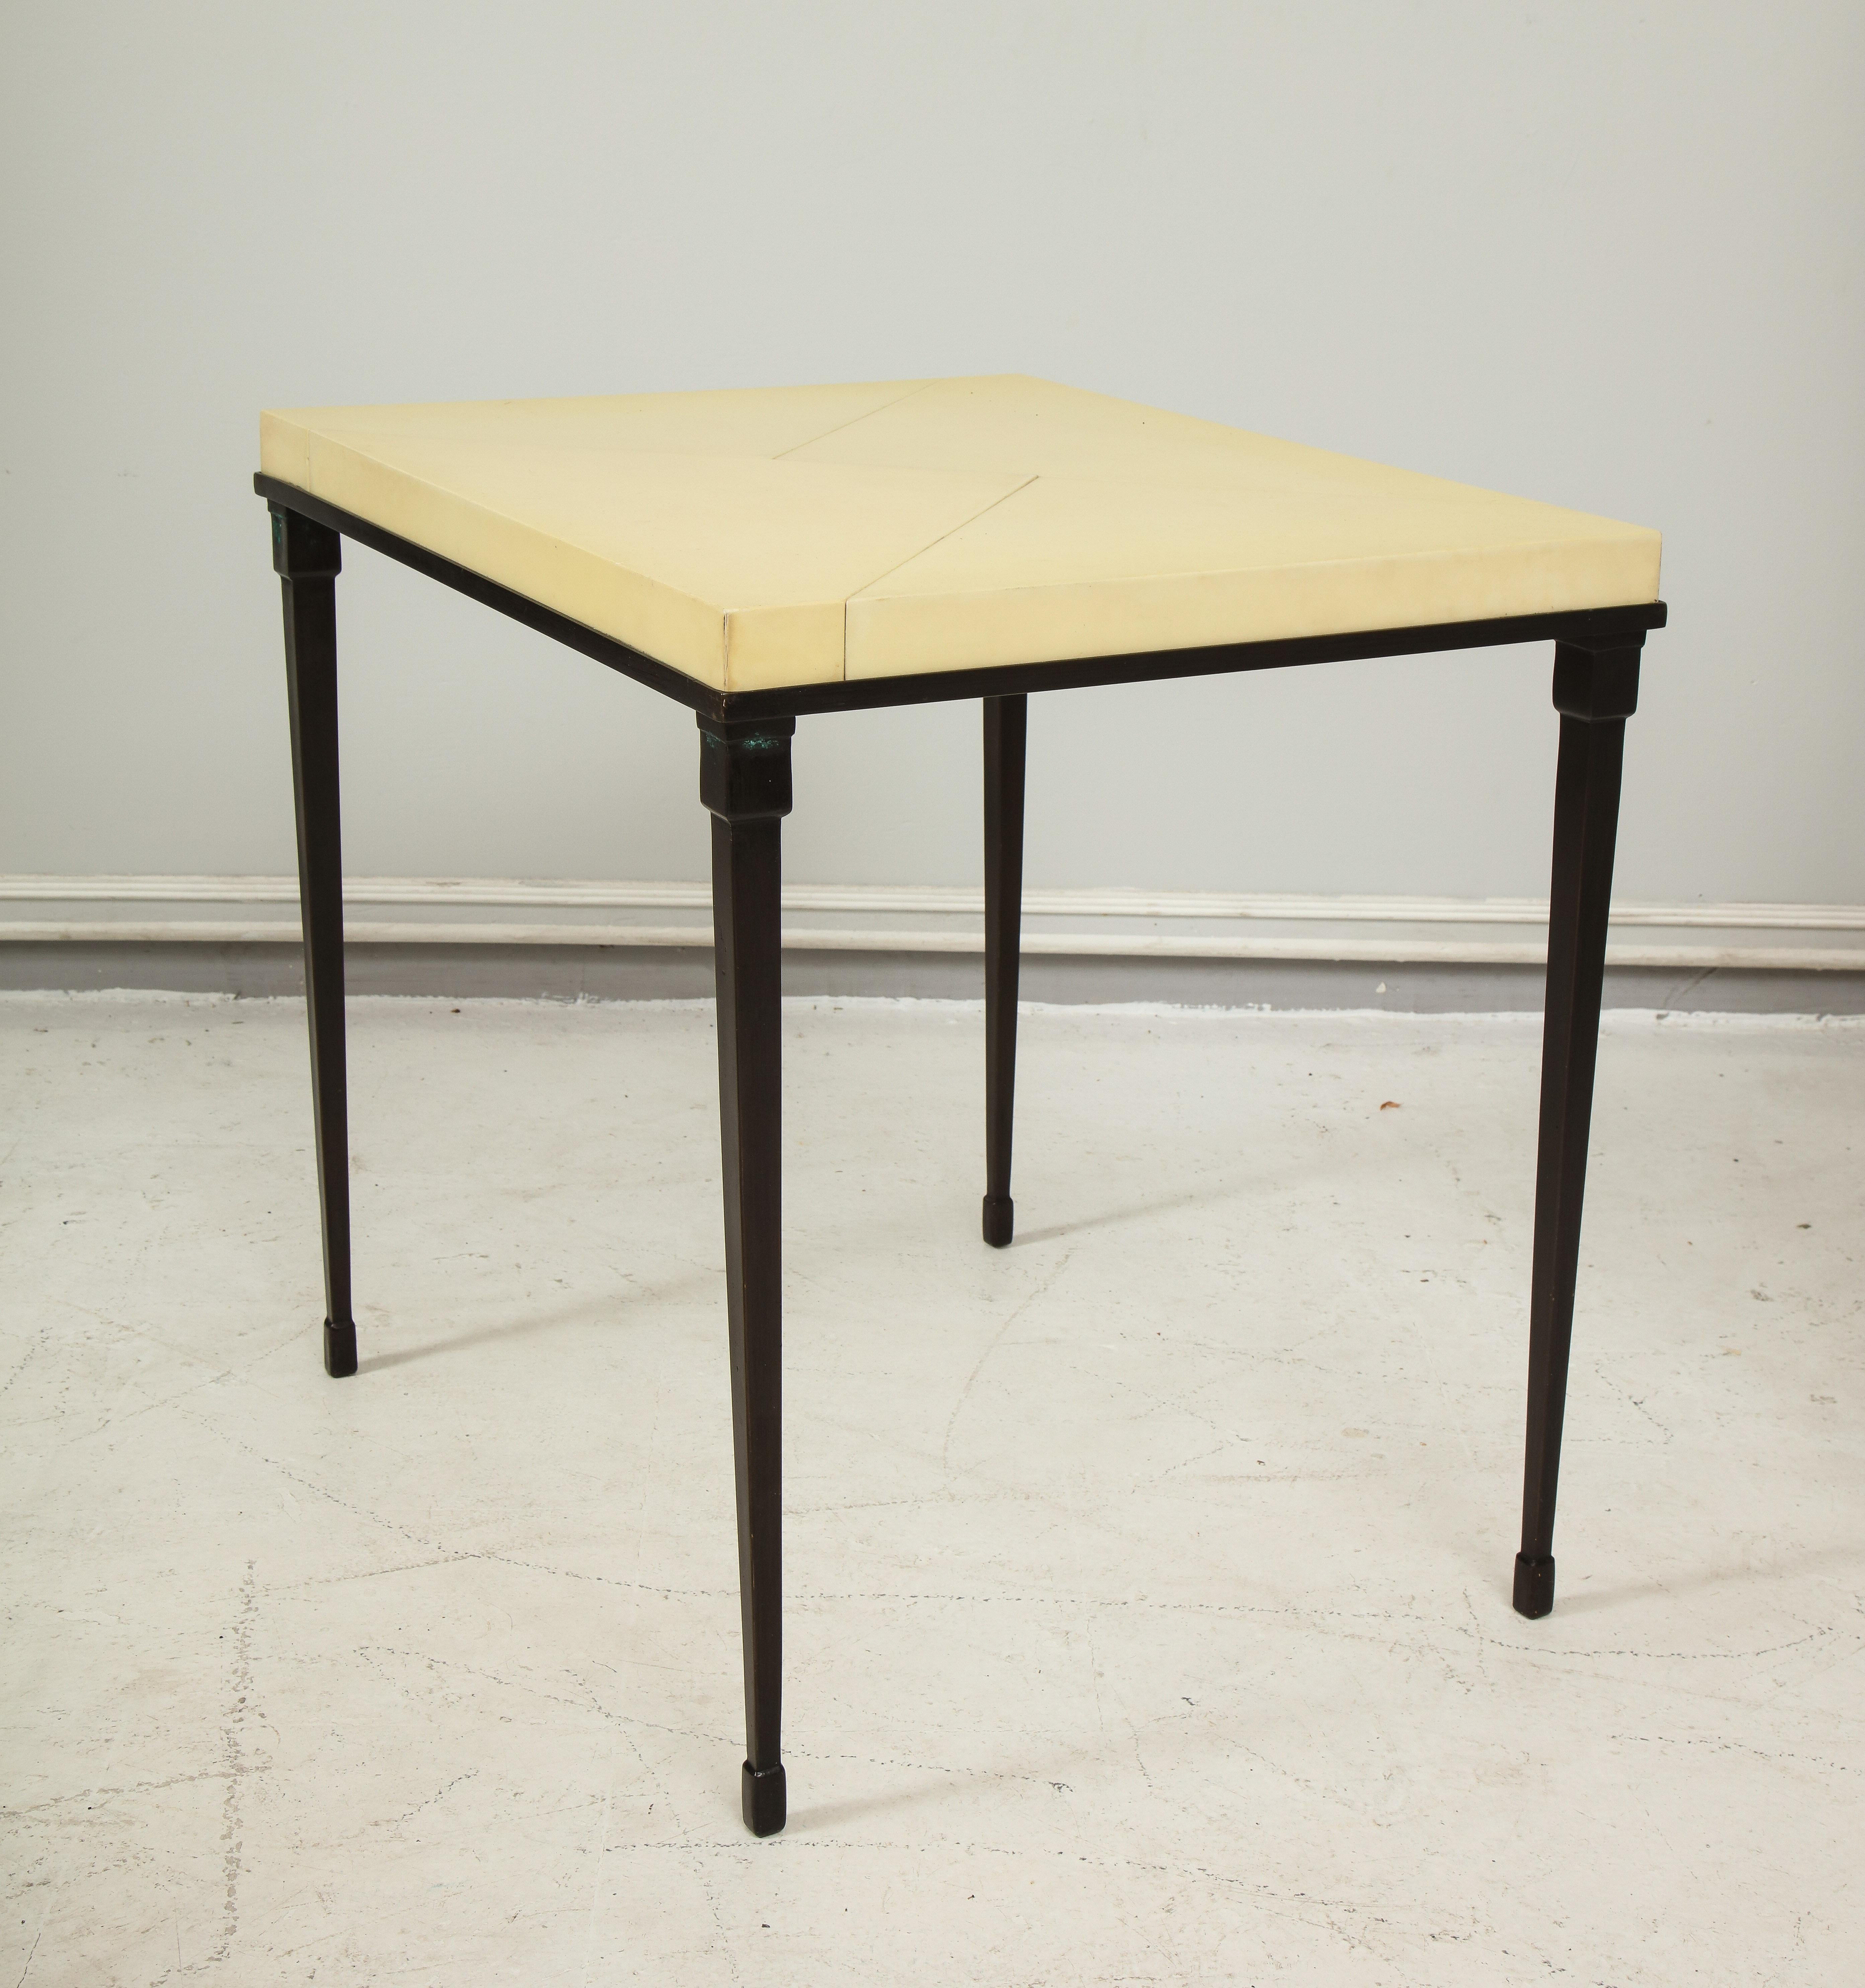 Custom parchment-top table with iron base
please note this table is customizable.